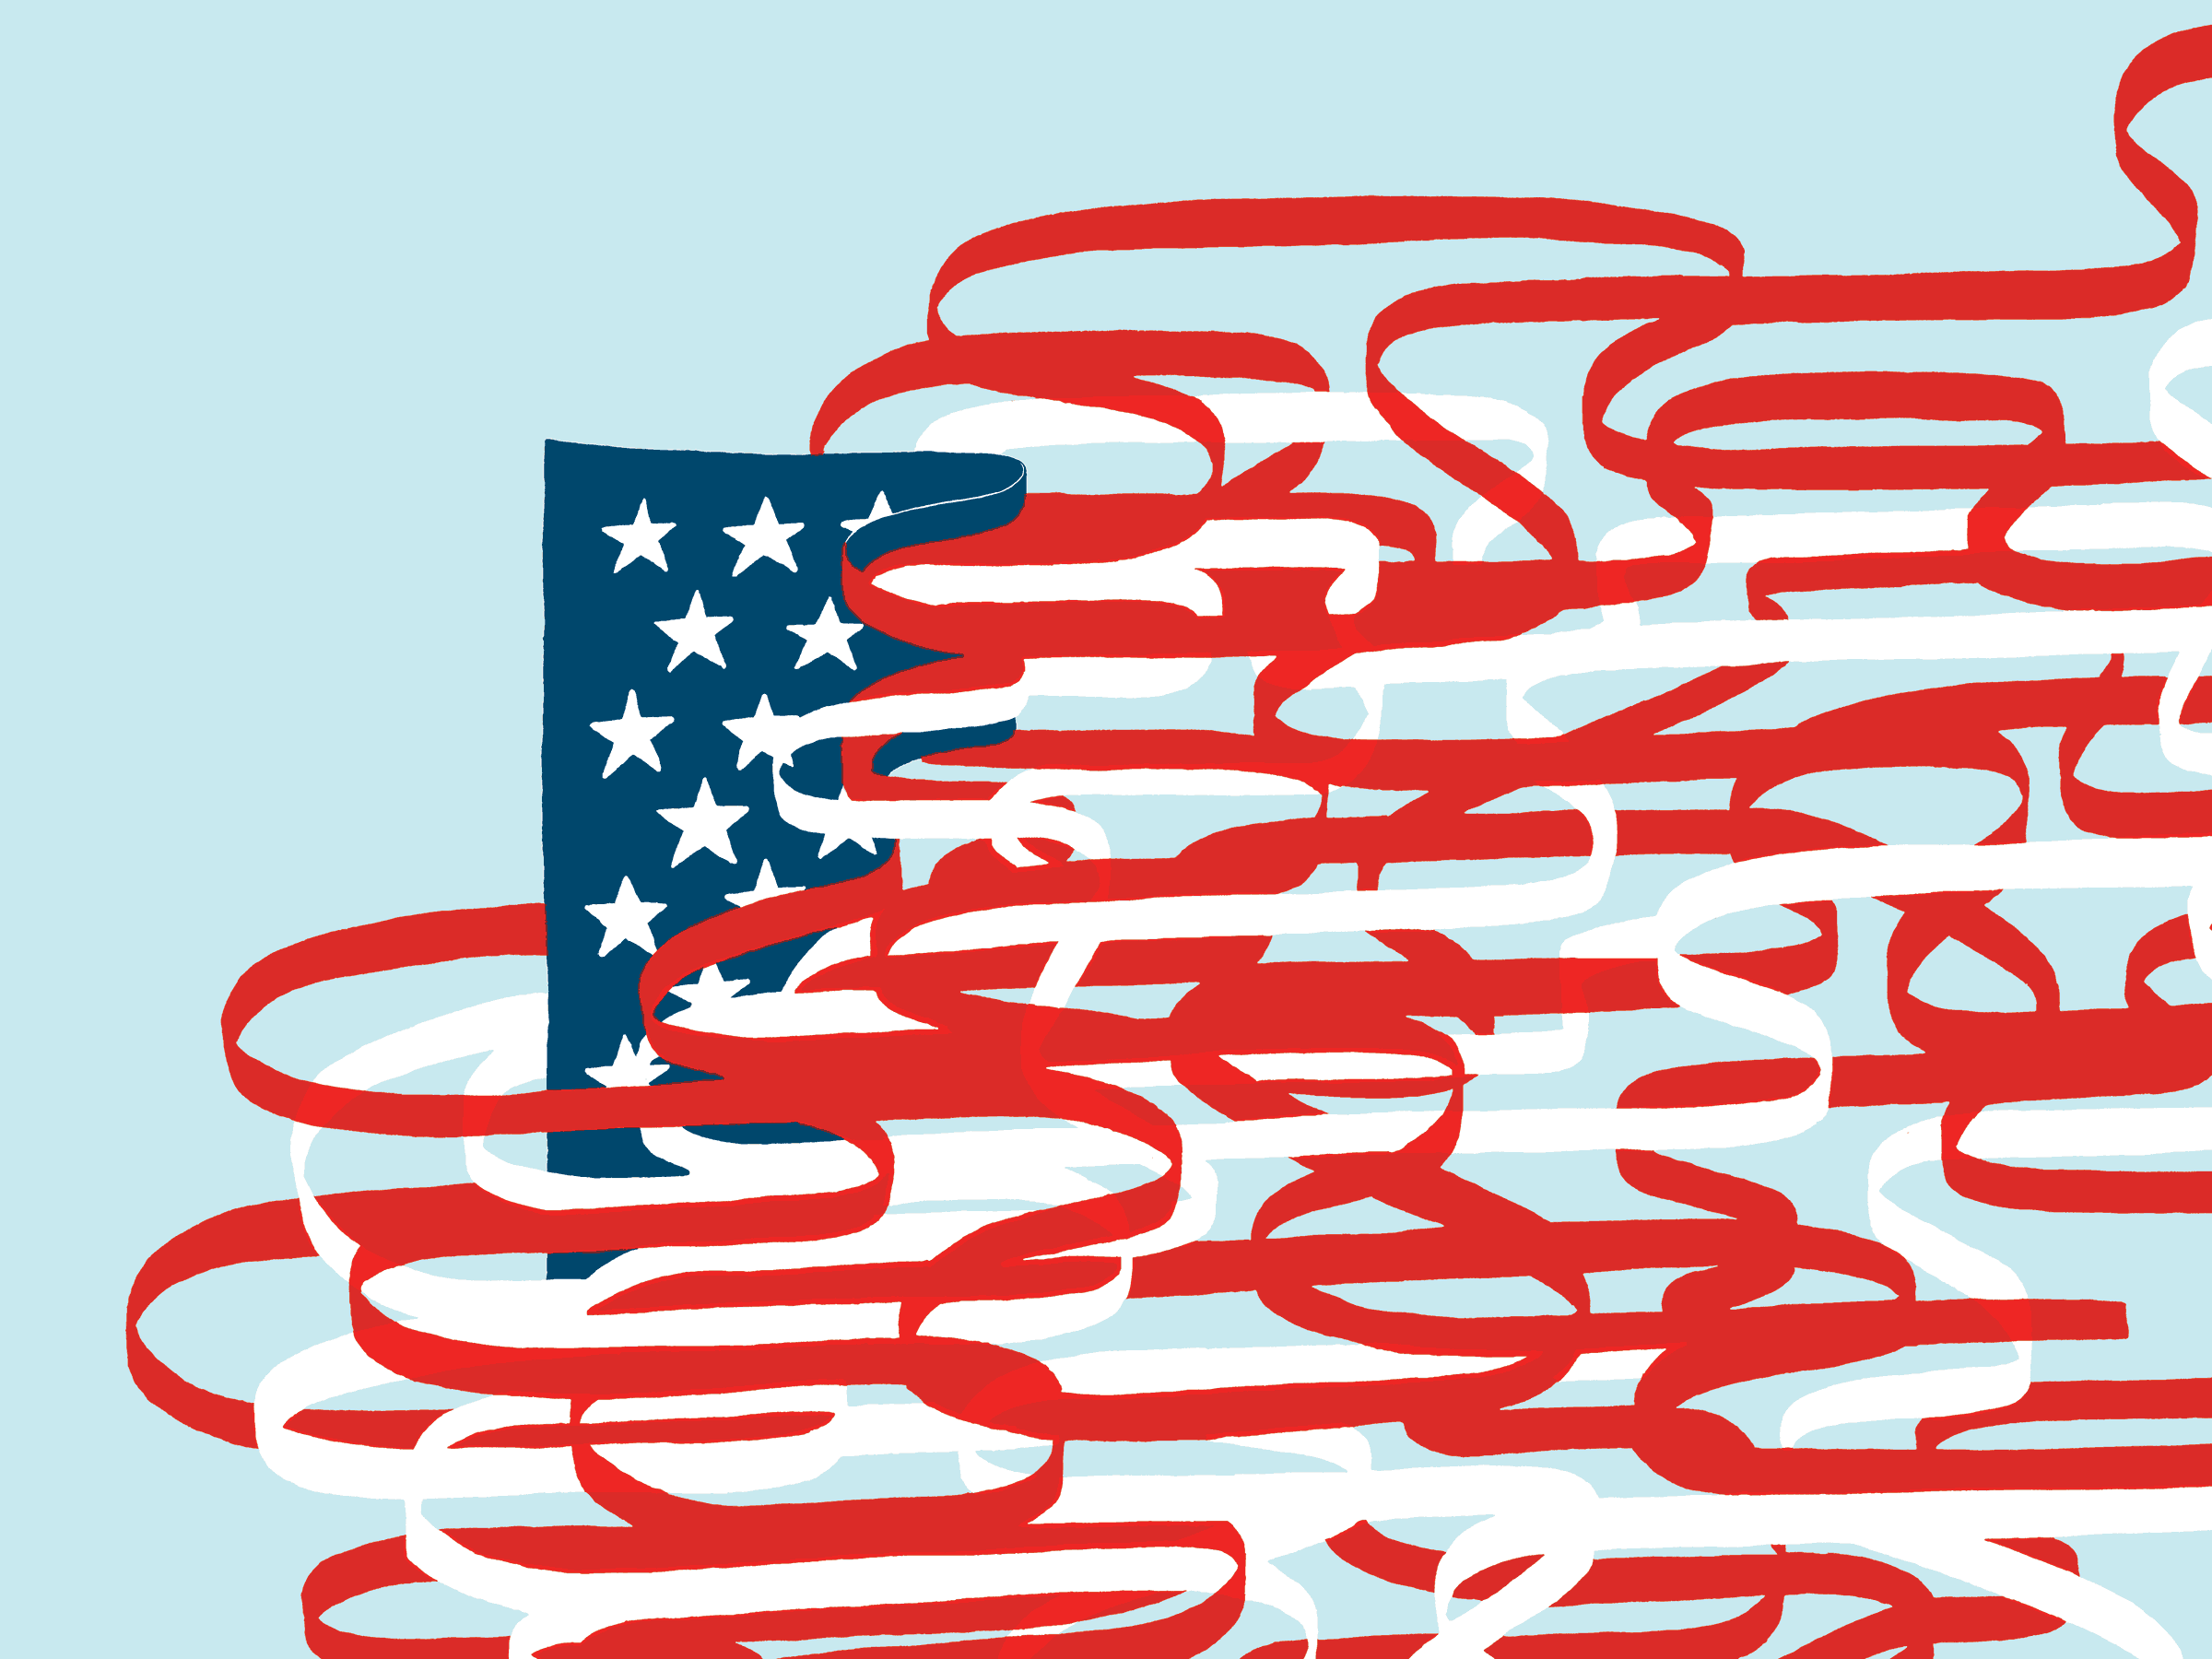 Through the Perilous Fight. A colorful screenprint of a tangled, snakelike, many-striped American flag